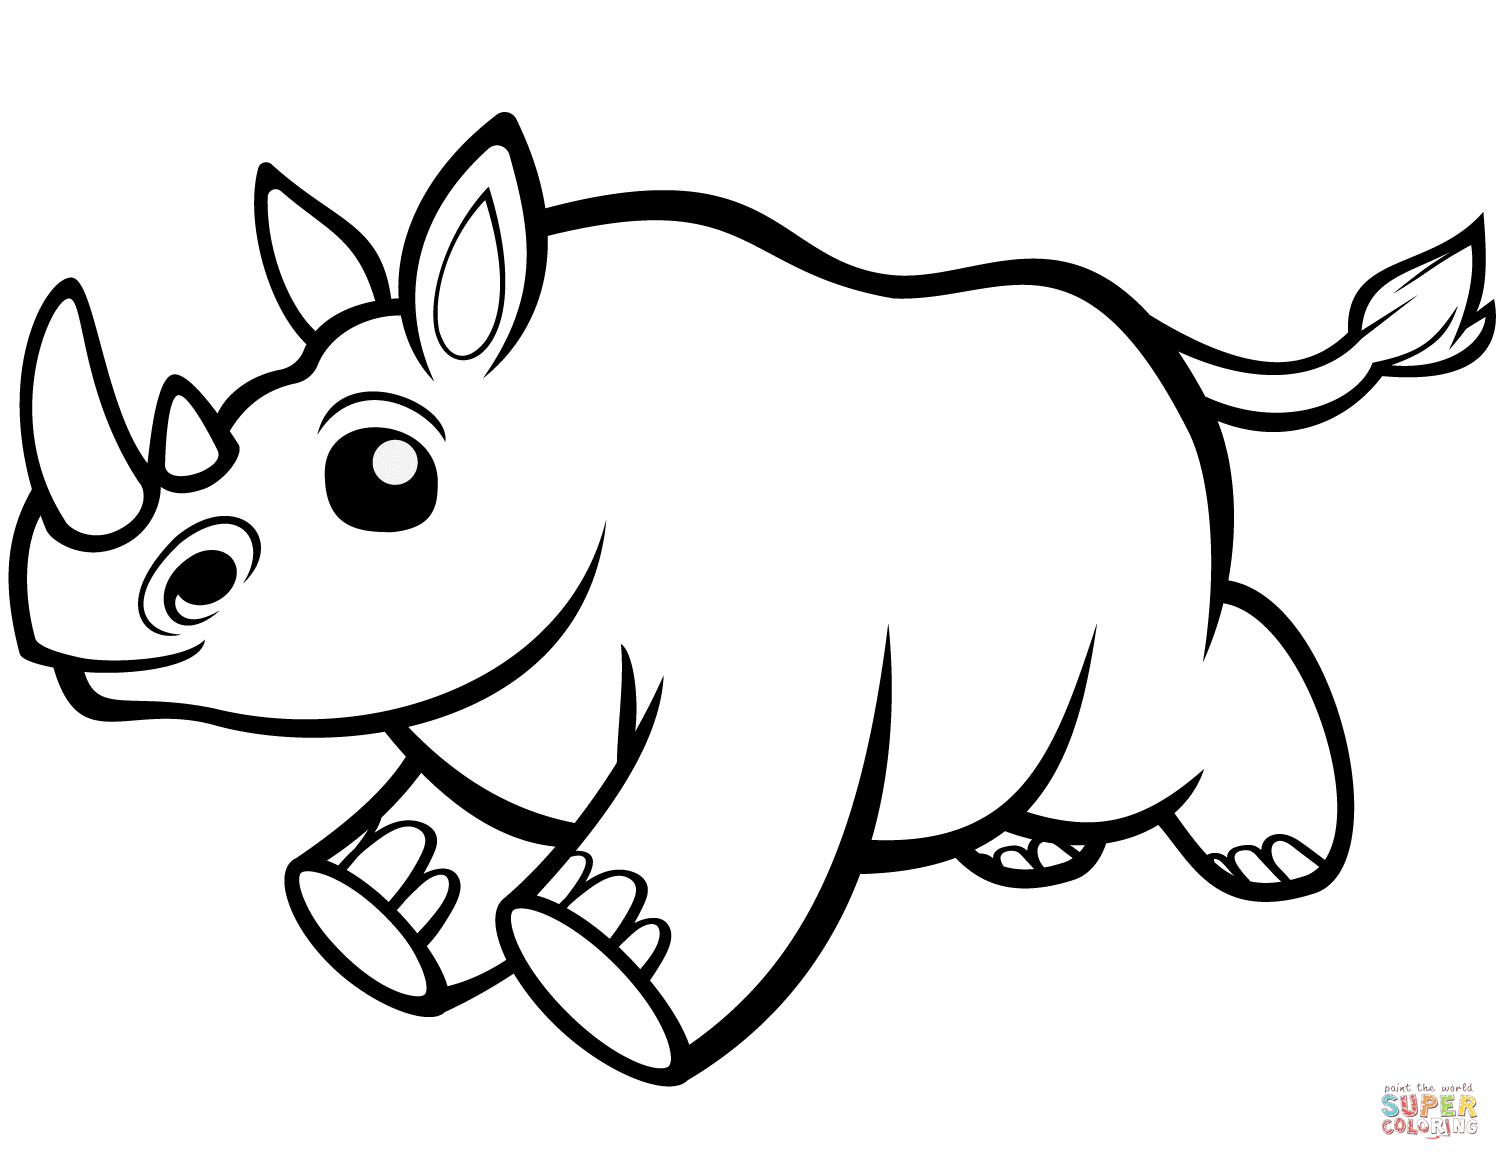 Cute baby rhino coloring page free printable coloring pages